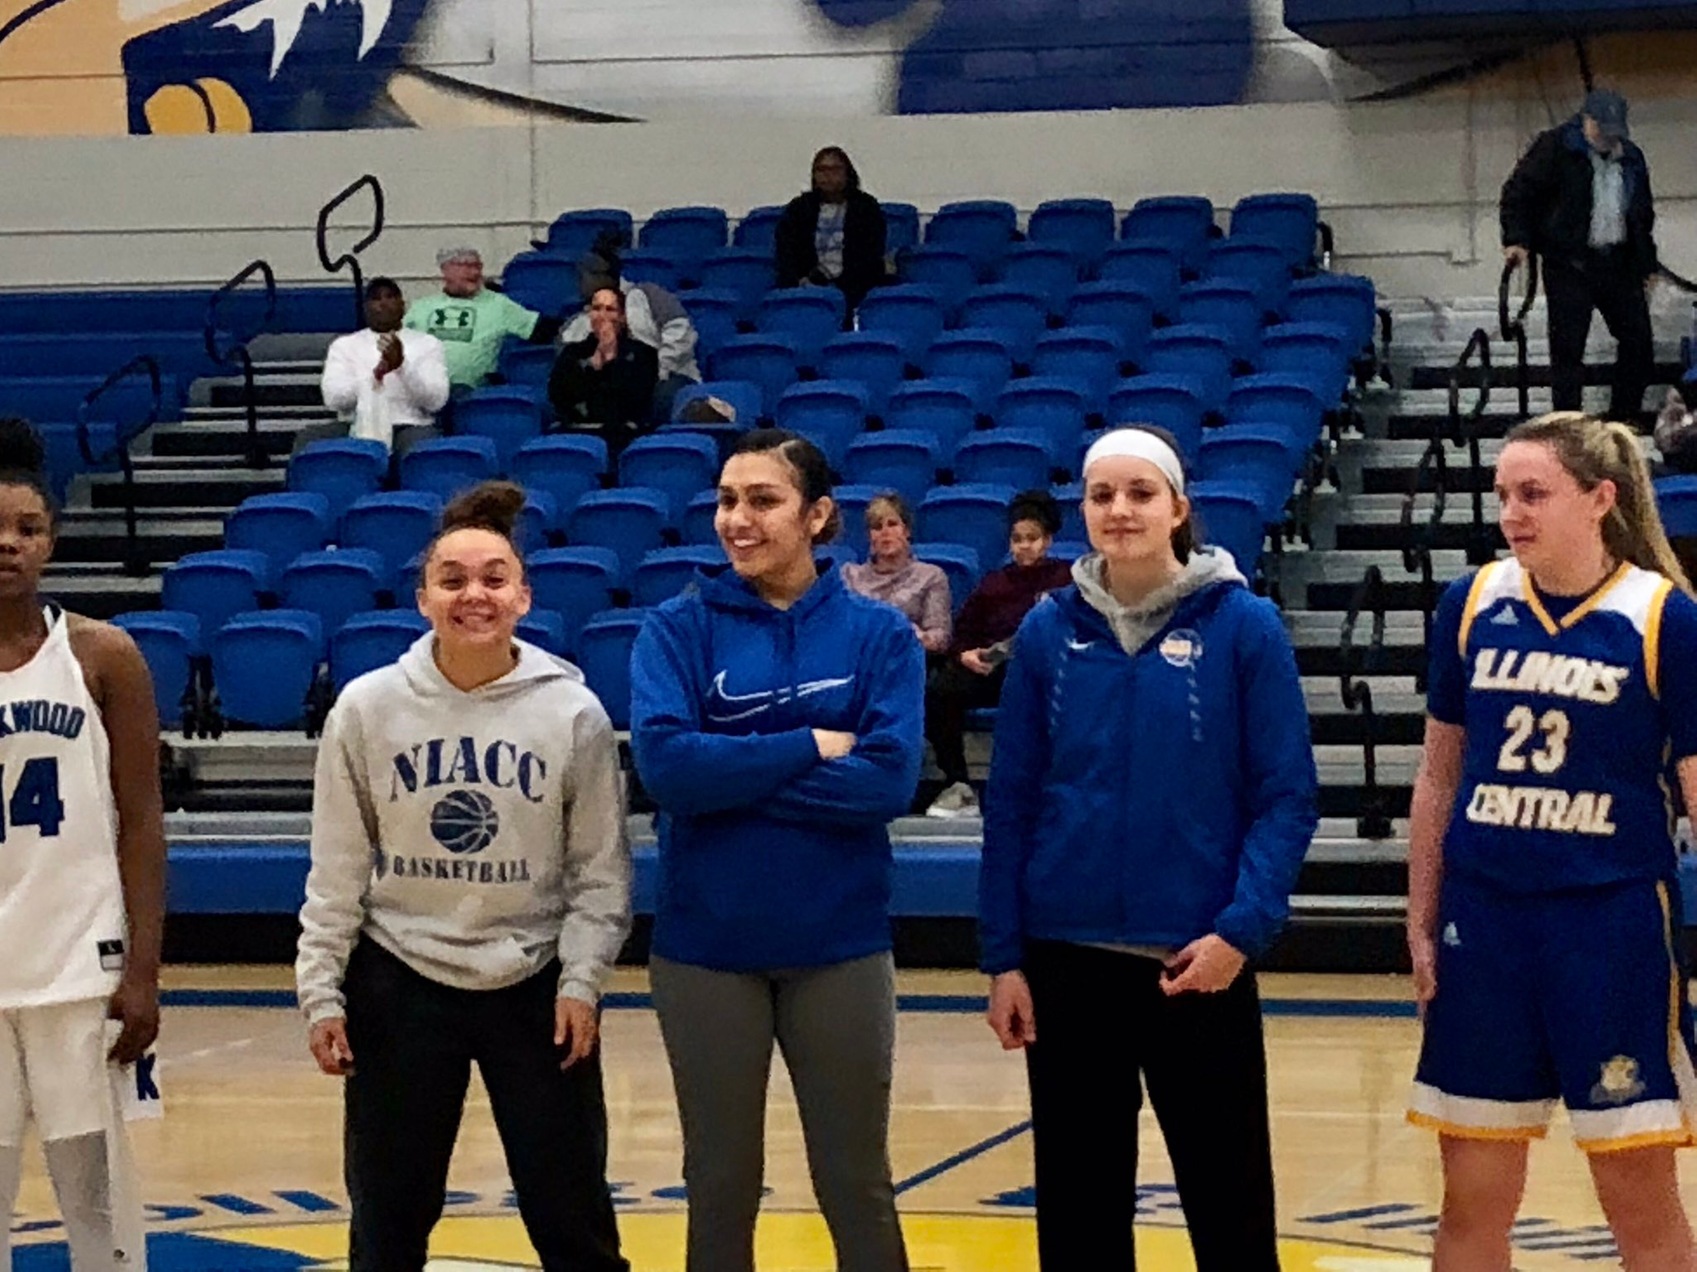 Kelcie Hale, Autam Mendez and Mandy Willems were all selected to the all-tournament team at the Cougar Holiday Tournament.